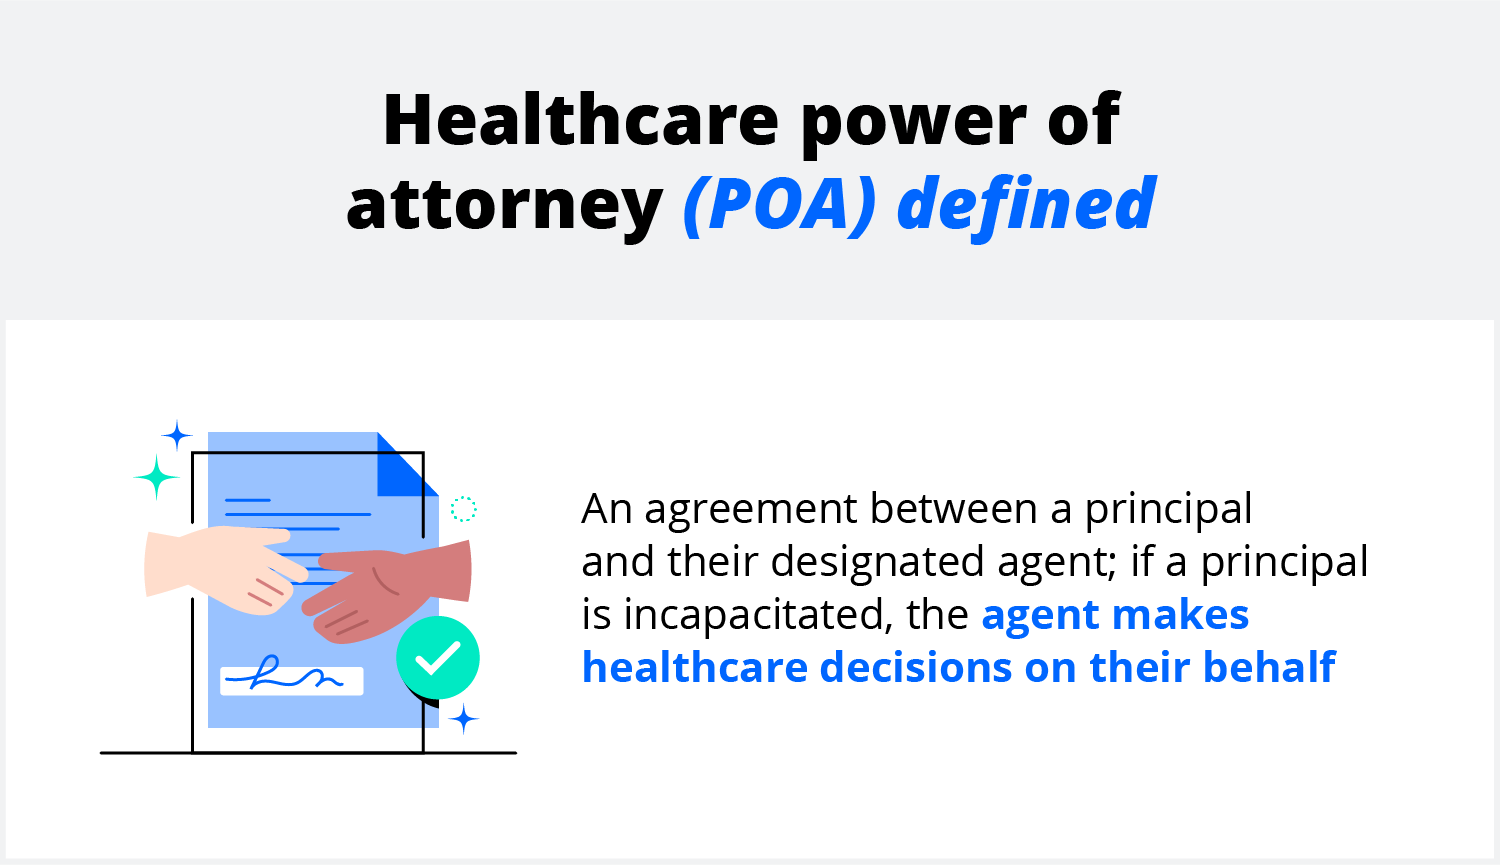 Healthcare power of attorney (POA) defined. An agreement between a principal and their designated agent; if a principal is incapacitated, the agent makes healthcare decisions on their behalf.